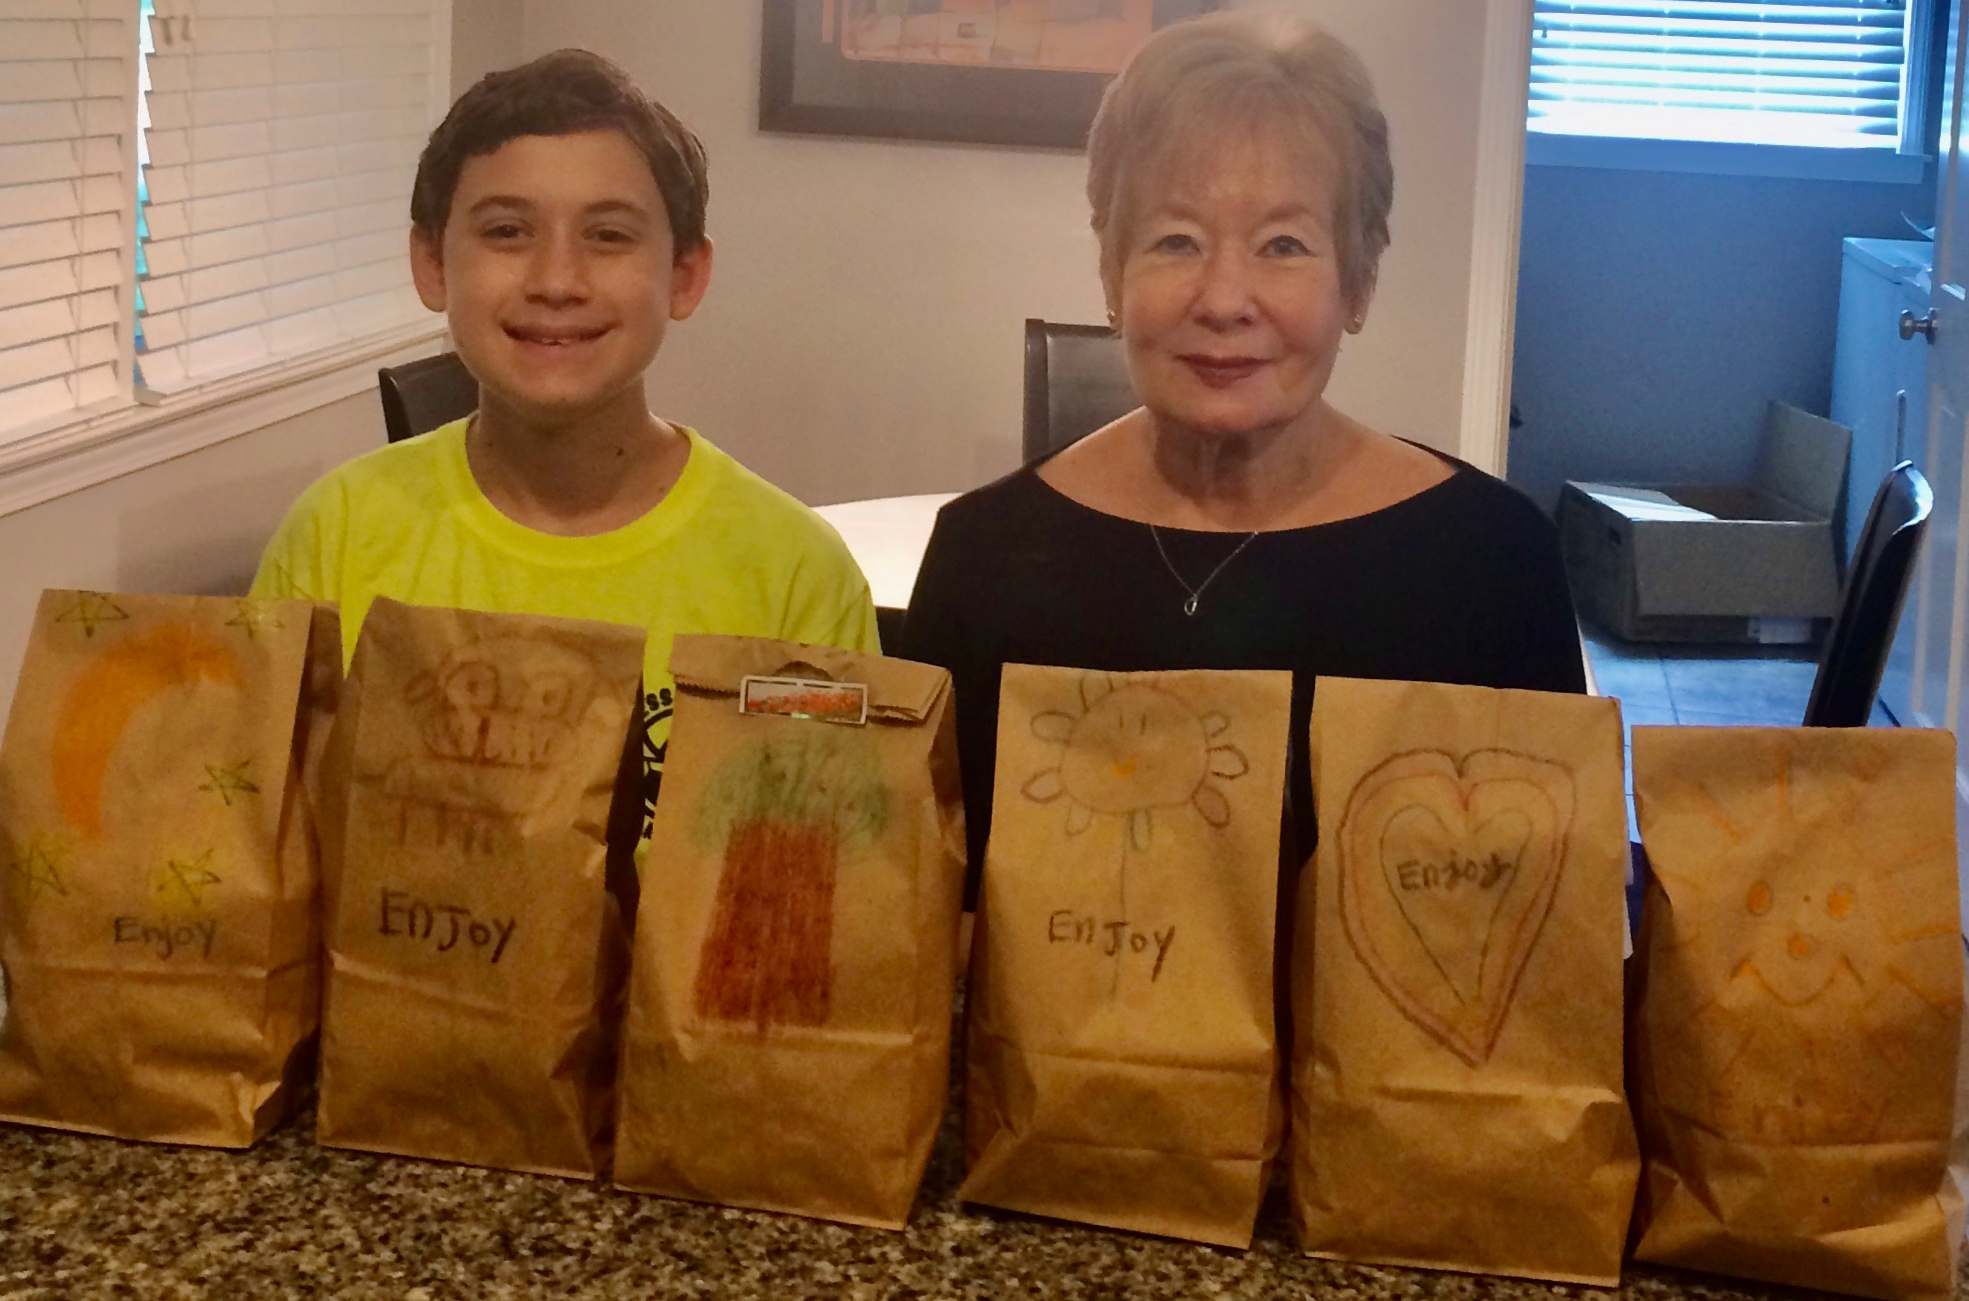 Dianne Jaslow and Joshua Weiss making lunches for Mary Hall Freedom House